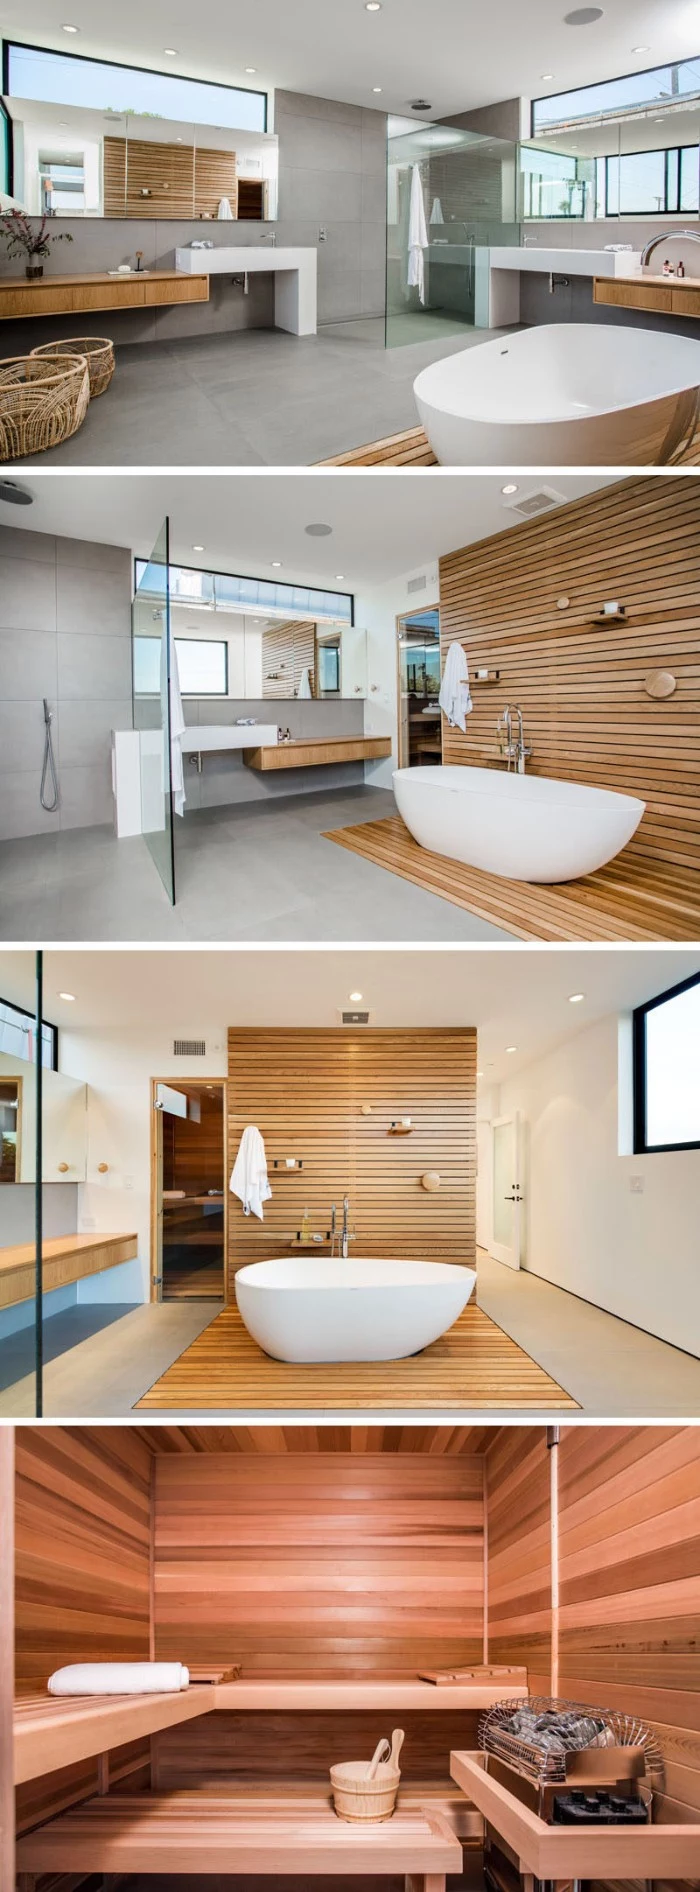 four images showing bathroom interiors, grey floor and walls, wooden details and a bathtub, a photo of a sauna, bath remodel ideas